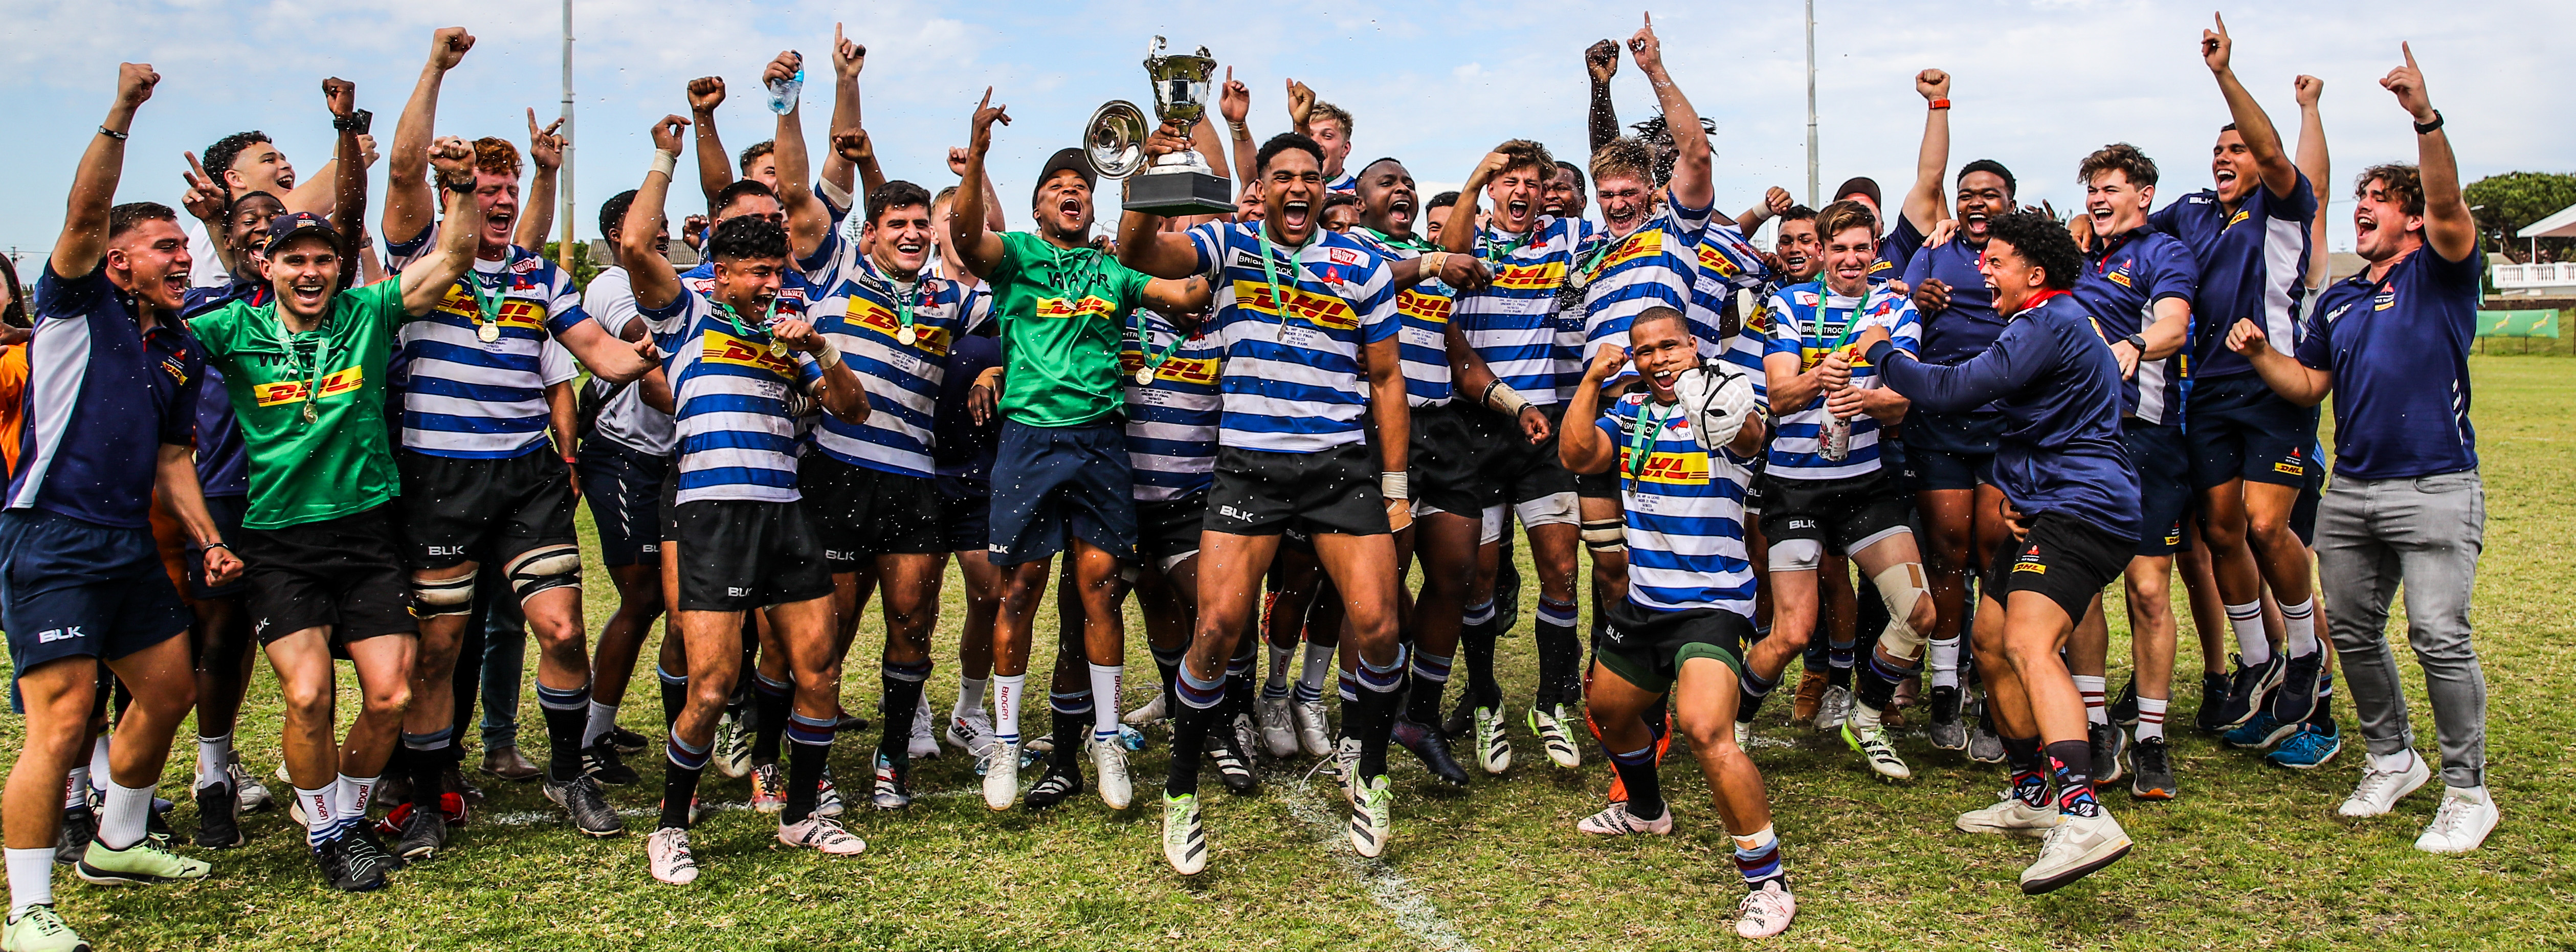 SA RUGBY UNDER-21 CUP SA Rugby